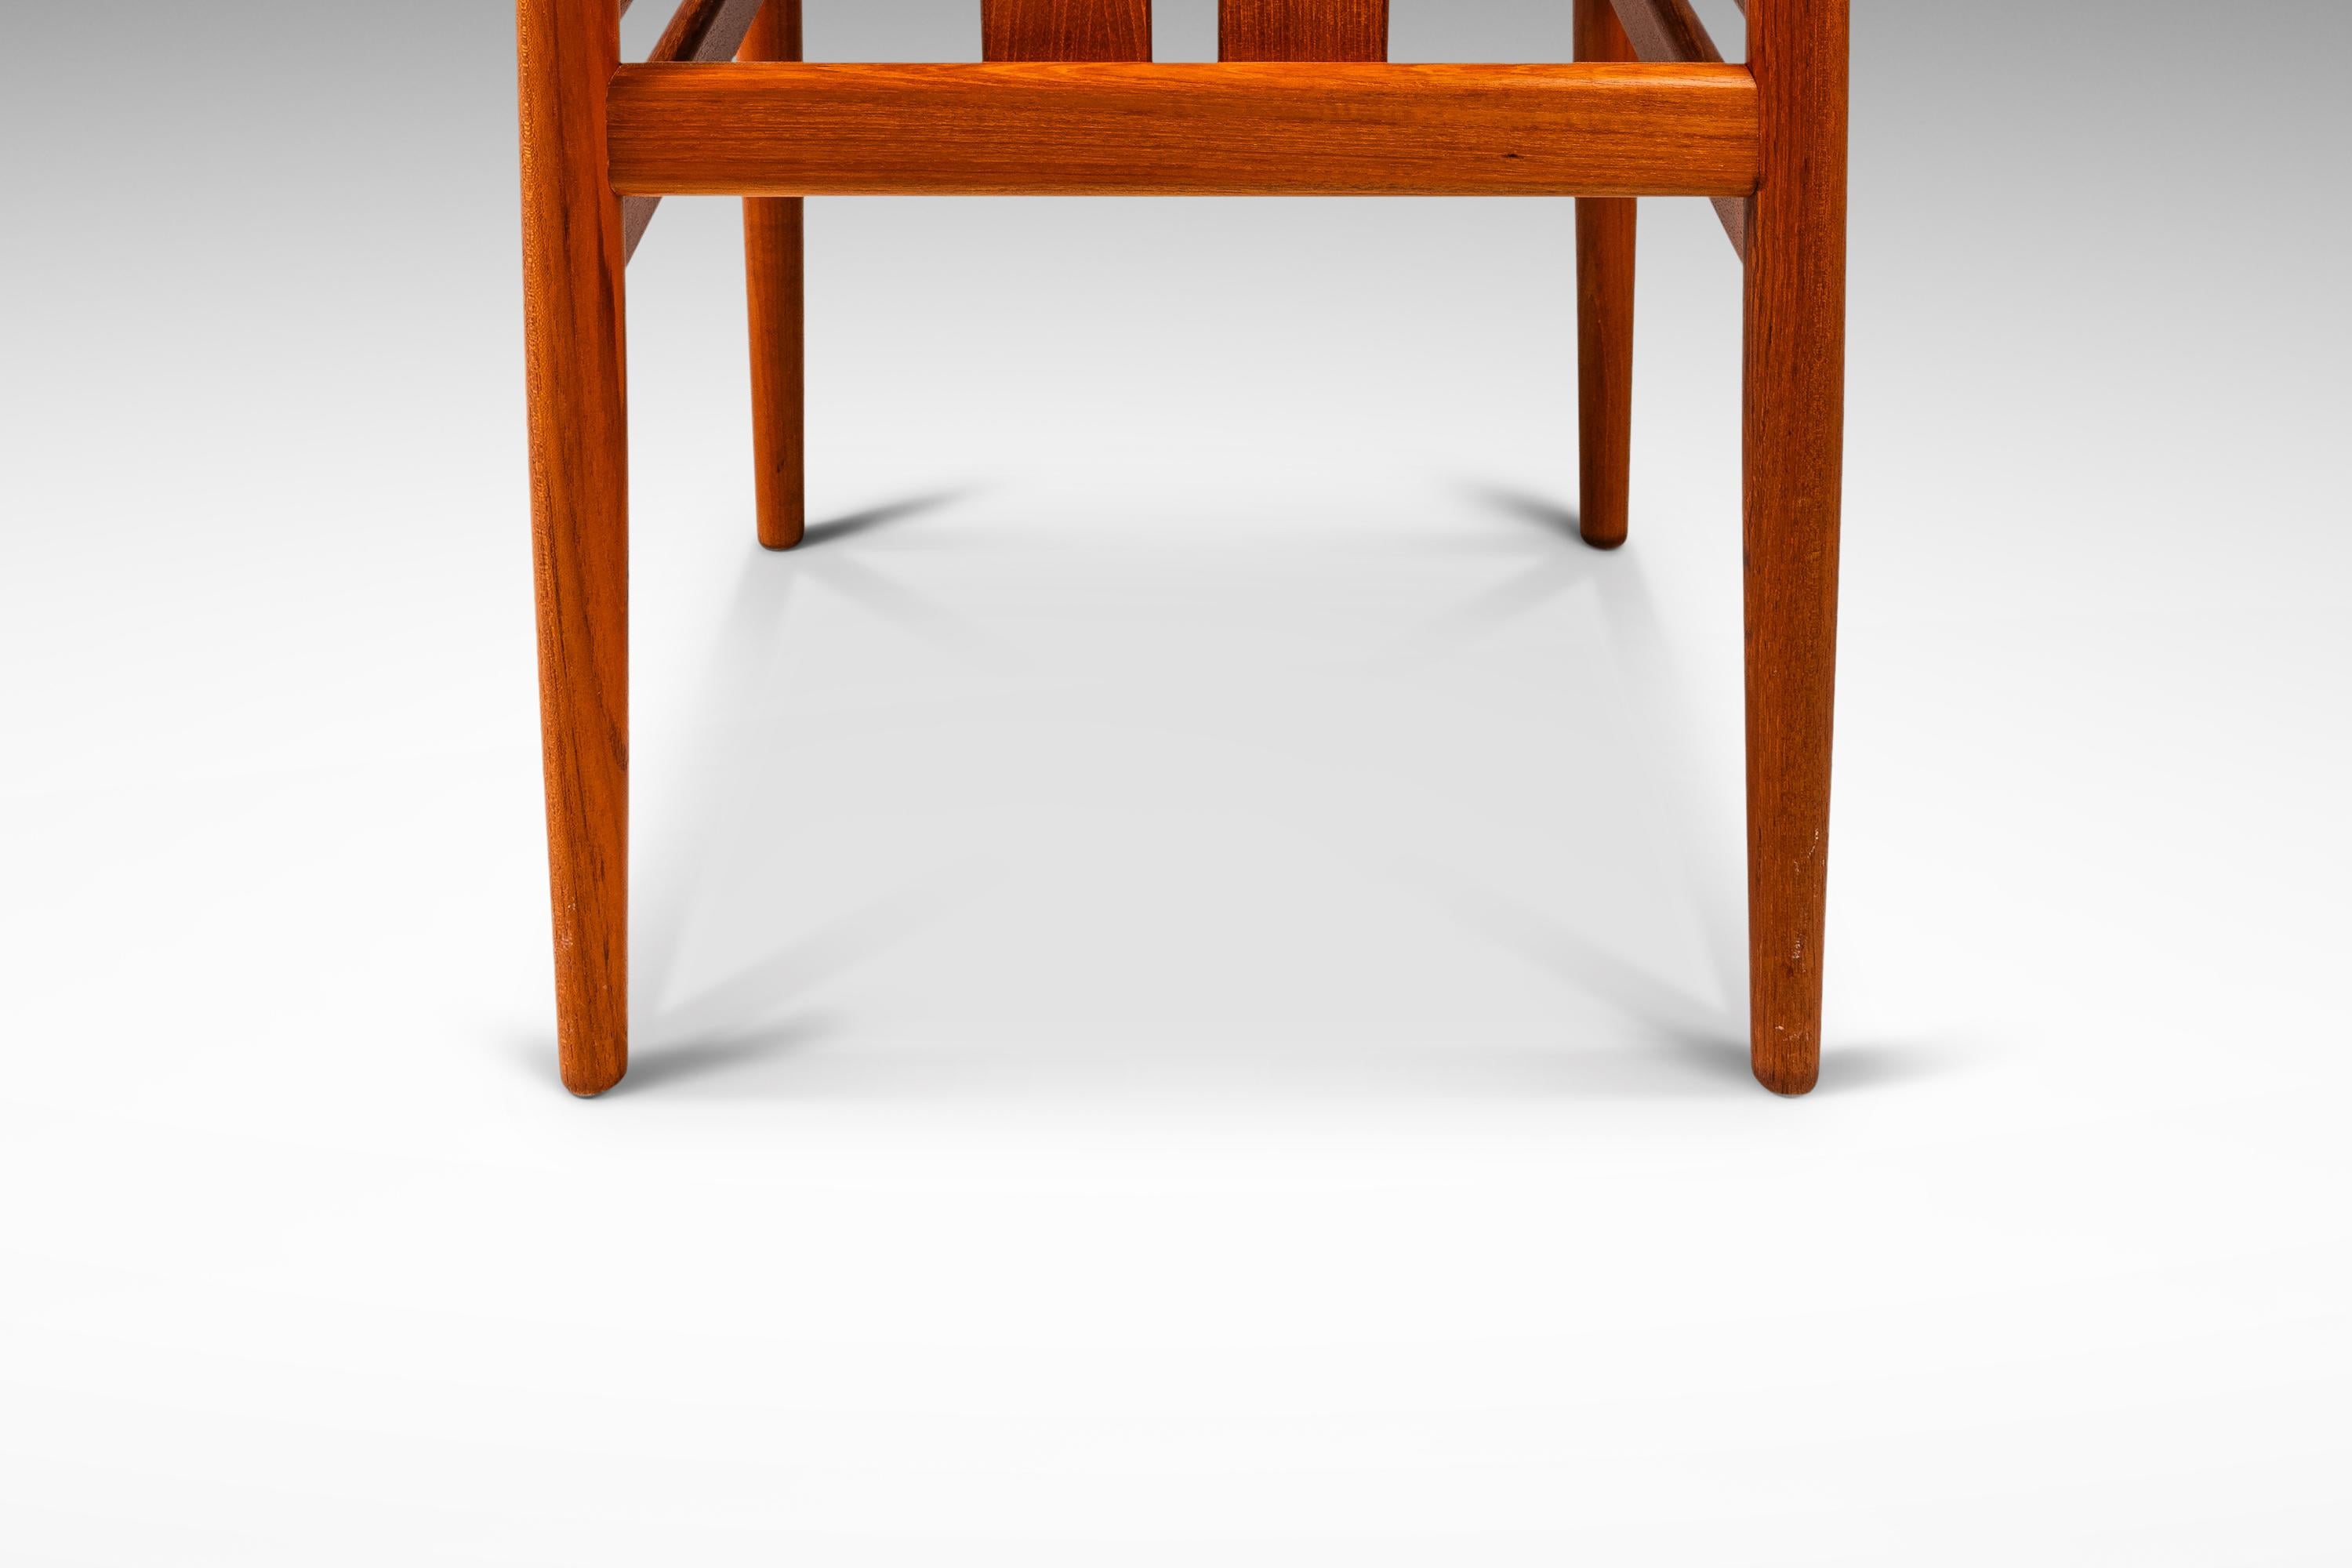 Set of 4 Dining Chairs, Teak & Oatmeal Knit Fabric by Vamdrup Stolefabrik, 1960s For Sale 9